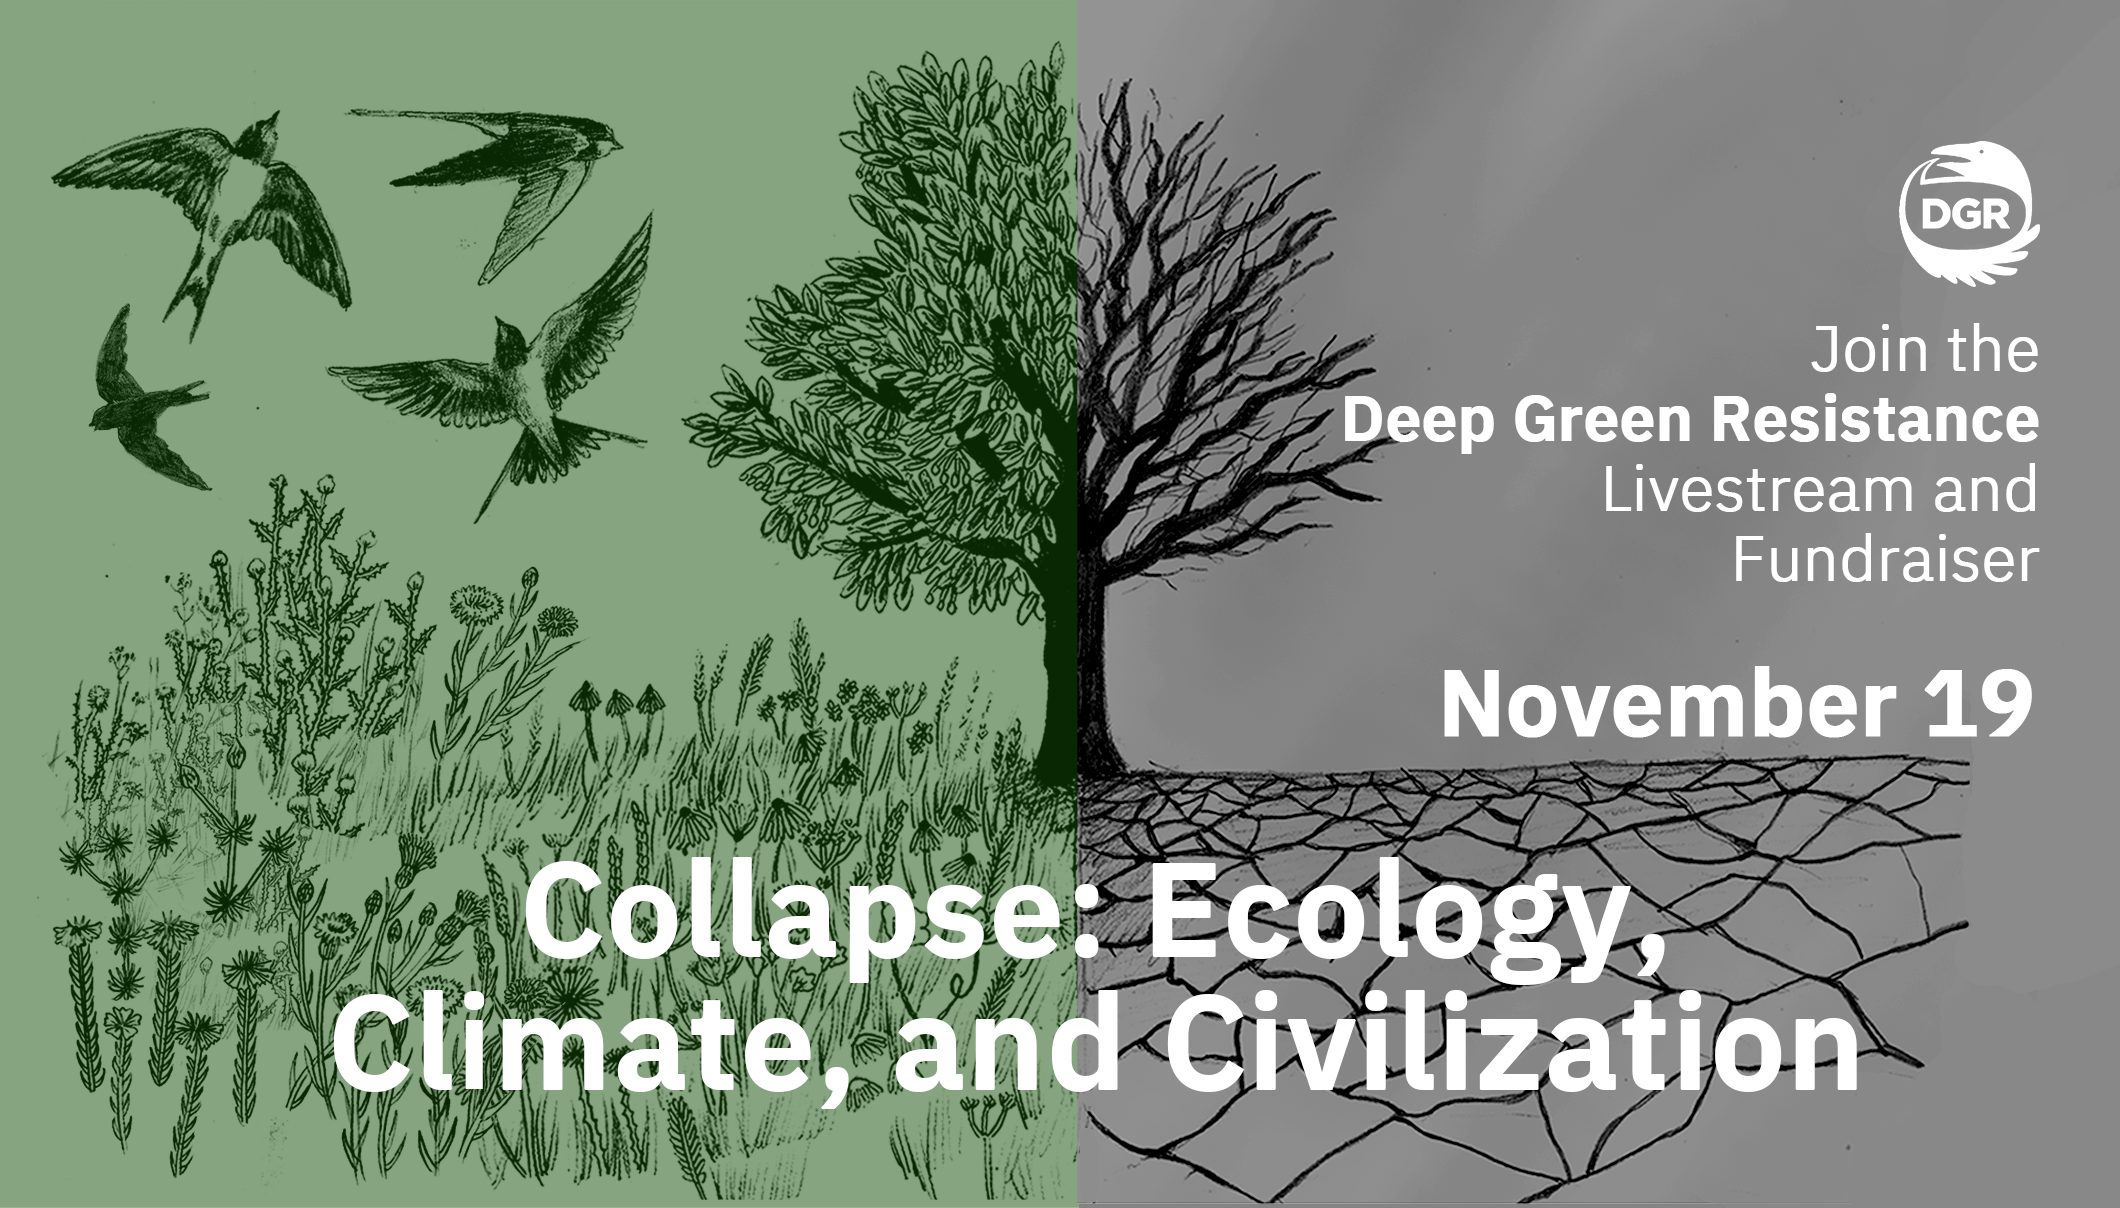 Collapse: Ecology, Climate and Civilization [Event Announcement]